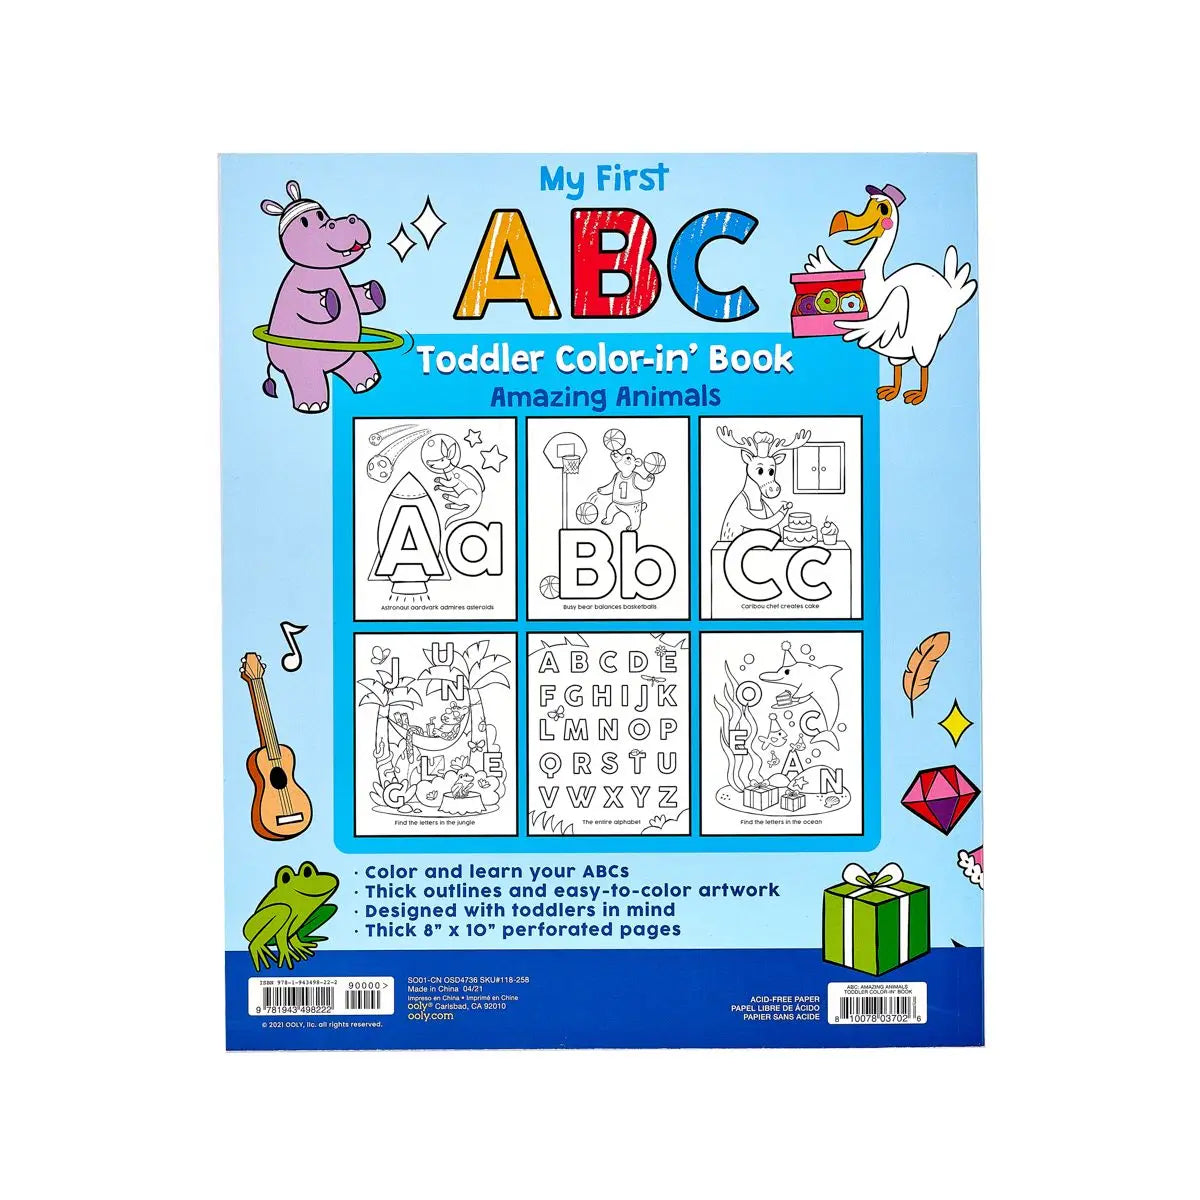 Ooly Toddler Color-in' Book: ABC Amazing Animals